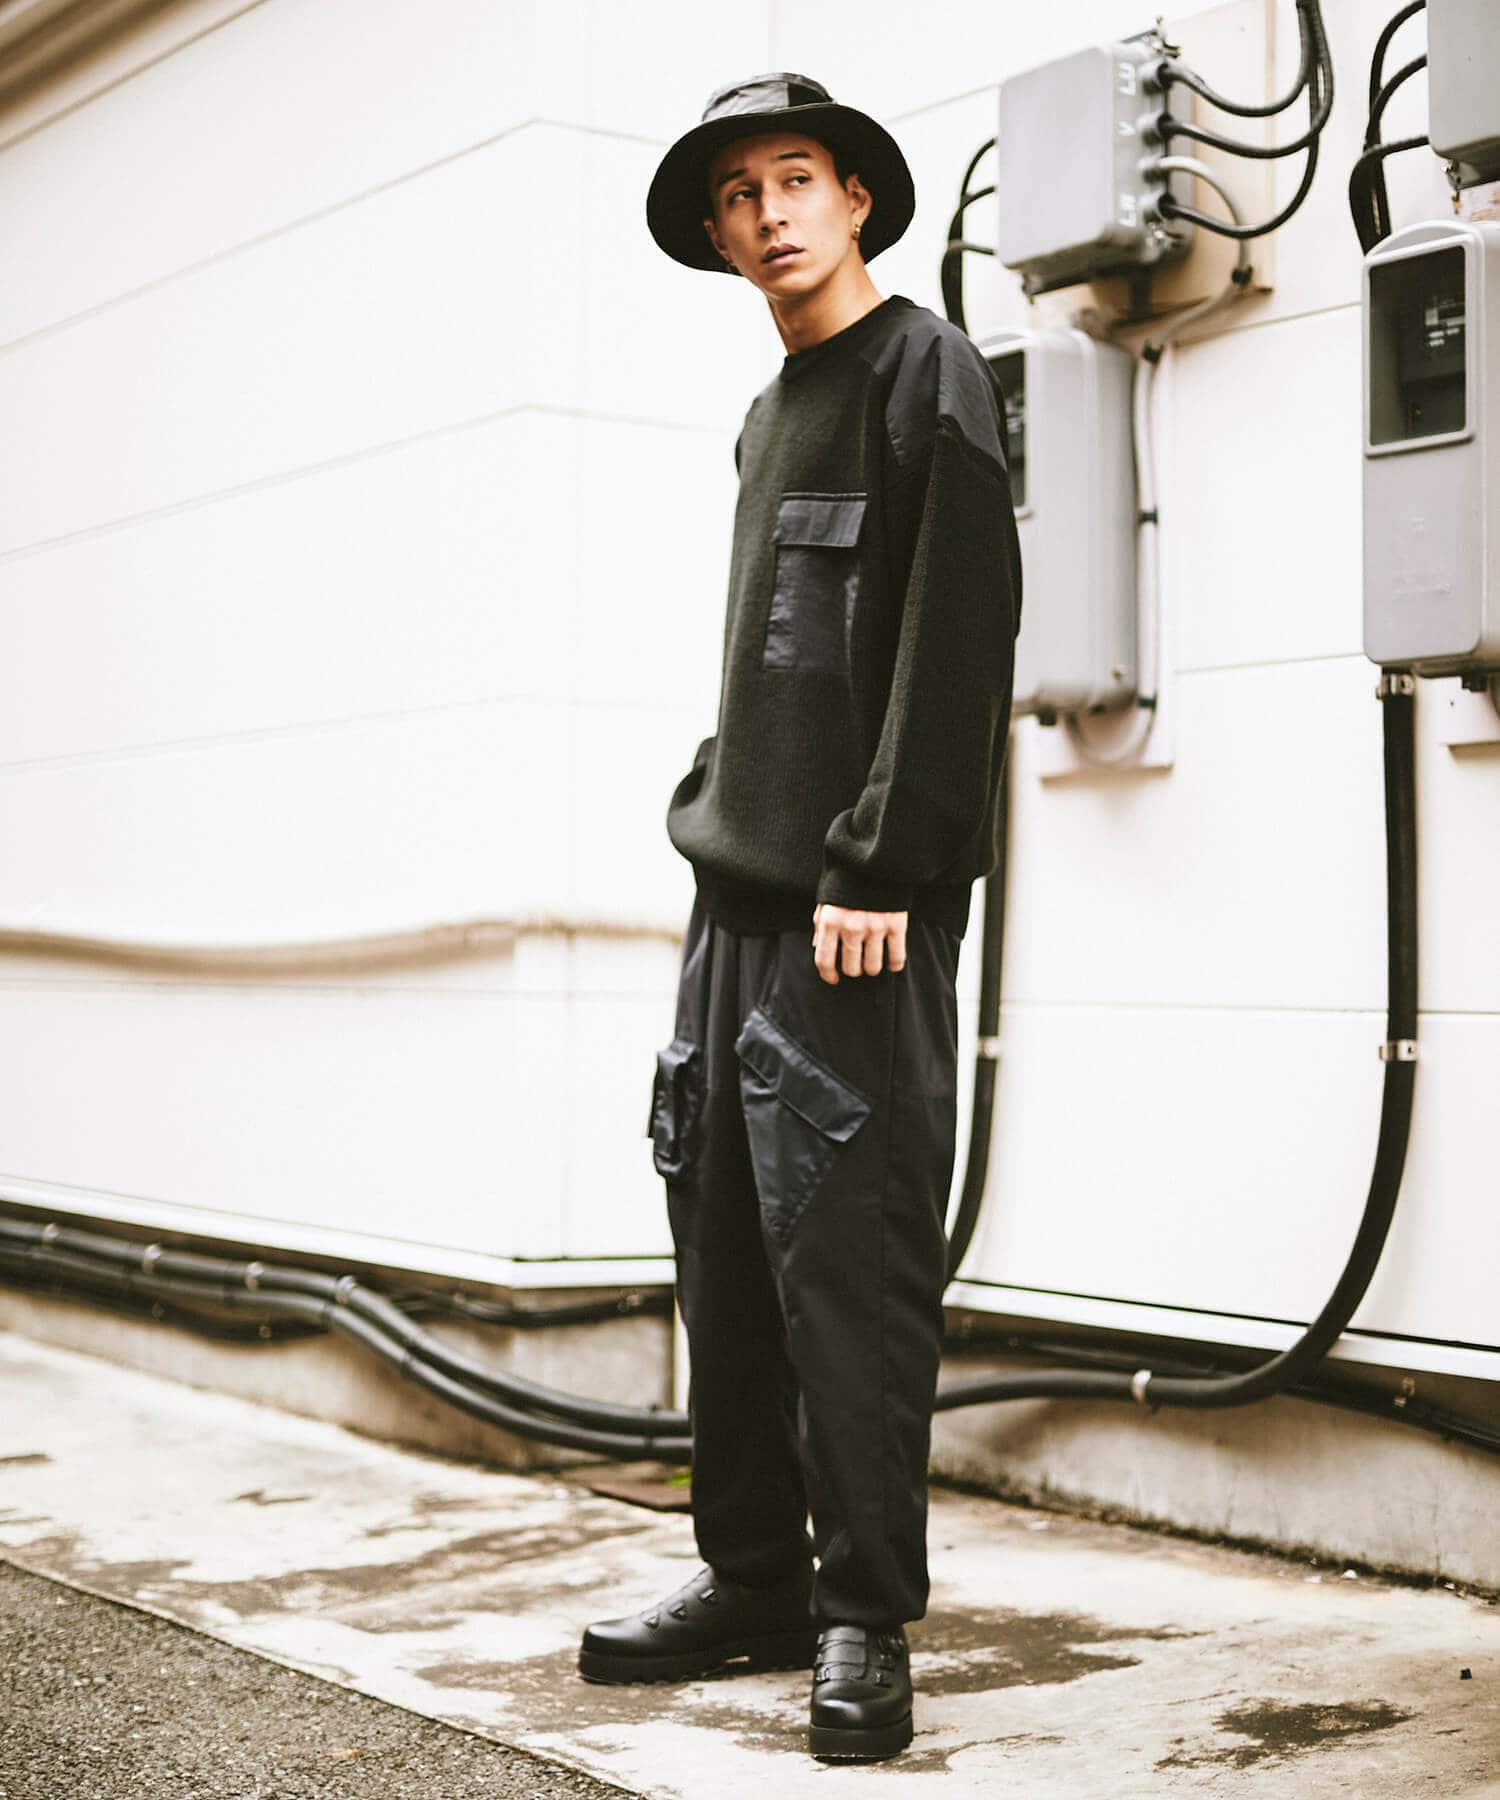 N.HOOLYWOOD ｜ BLACK MILITALY COLLECTION｜ STUDIOUS ONLINE公式通販